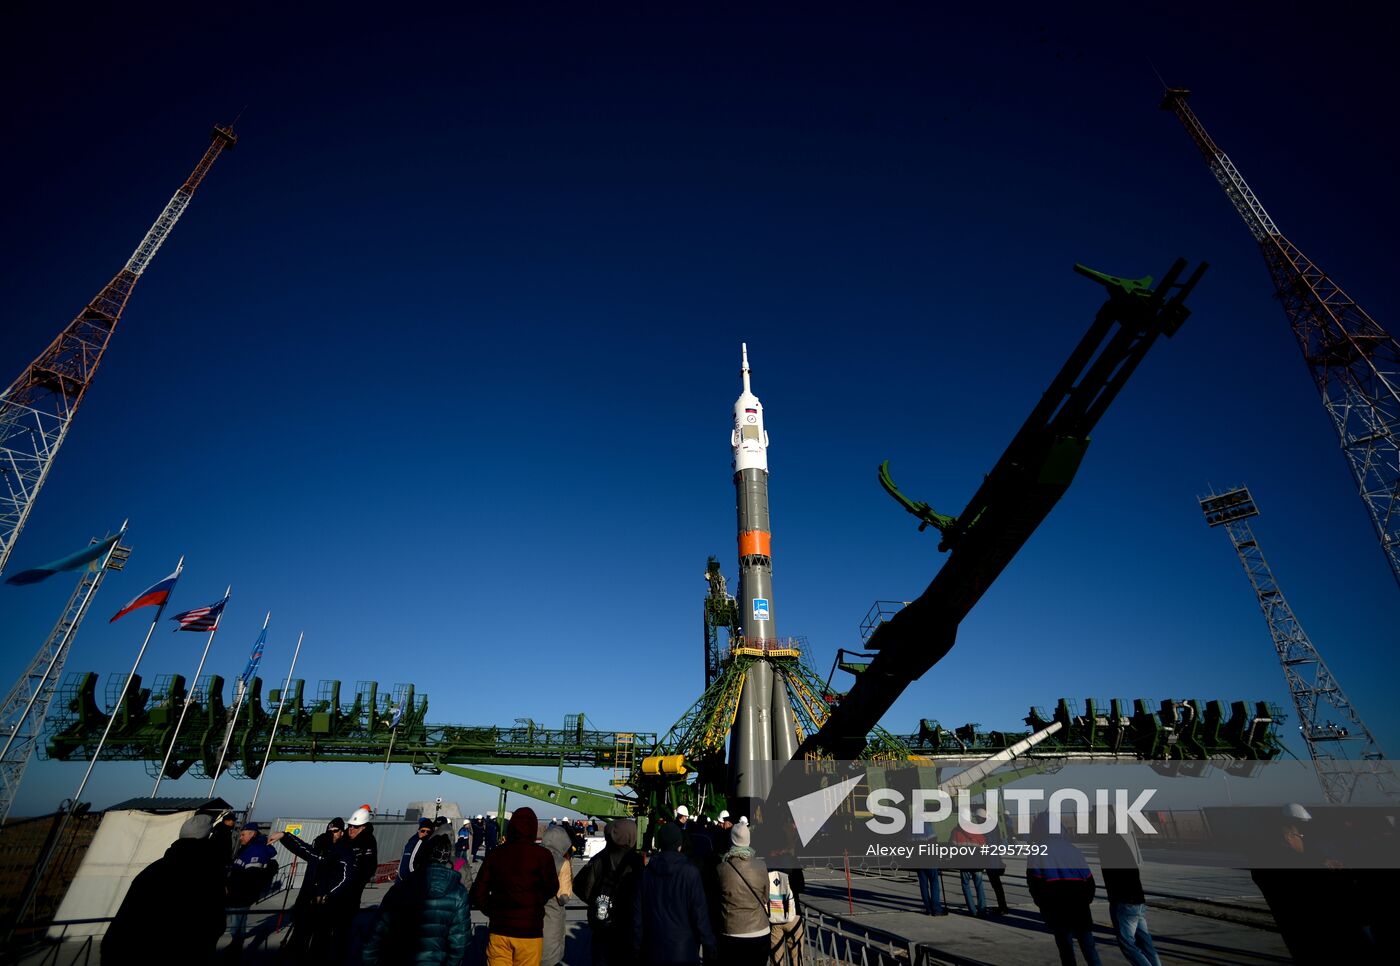 Soyuz MS-02 spacecraft and launch vehicle rolled to be installed on launch pad at Baikonur